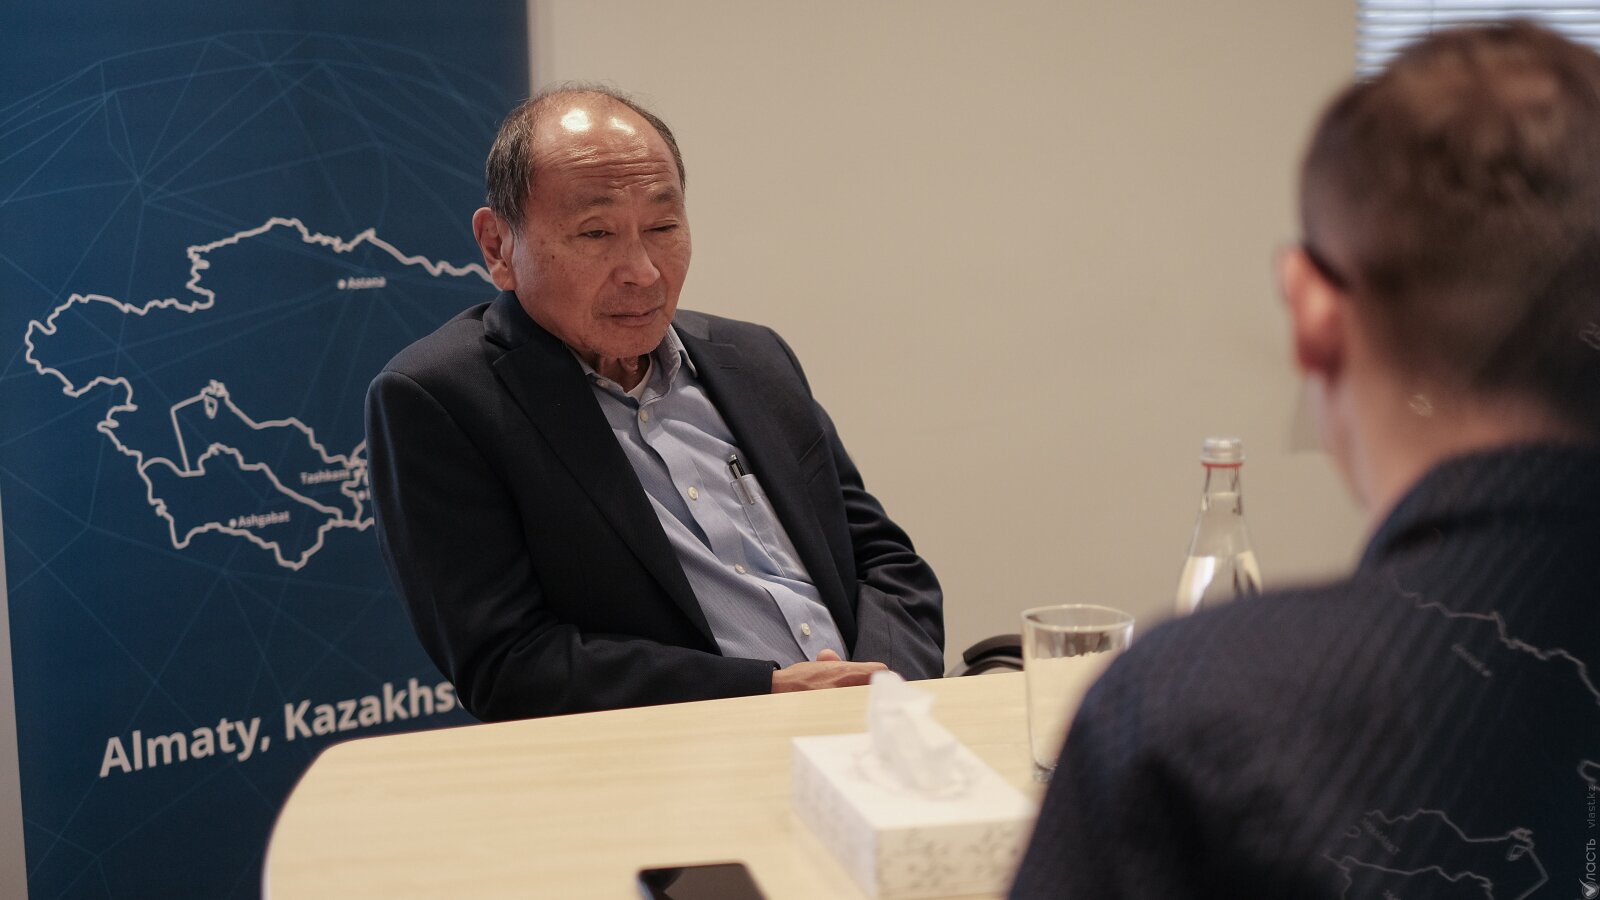 Francis Fukuyama: “People don’t know what alternative system they want instead of this one”